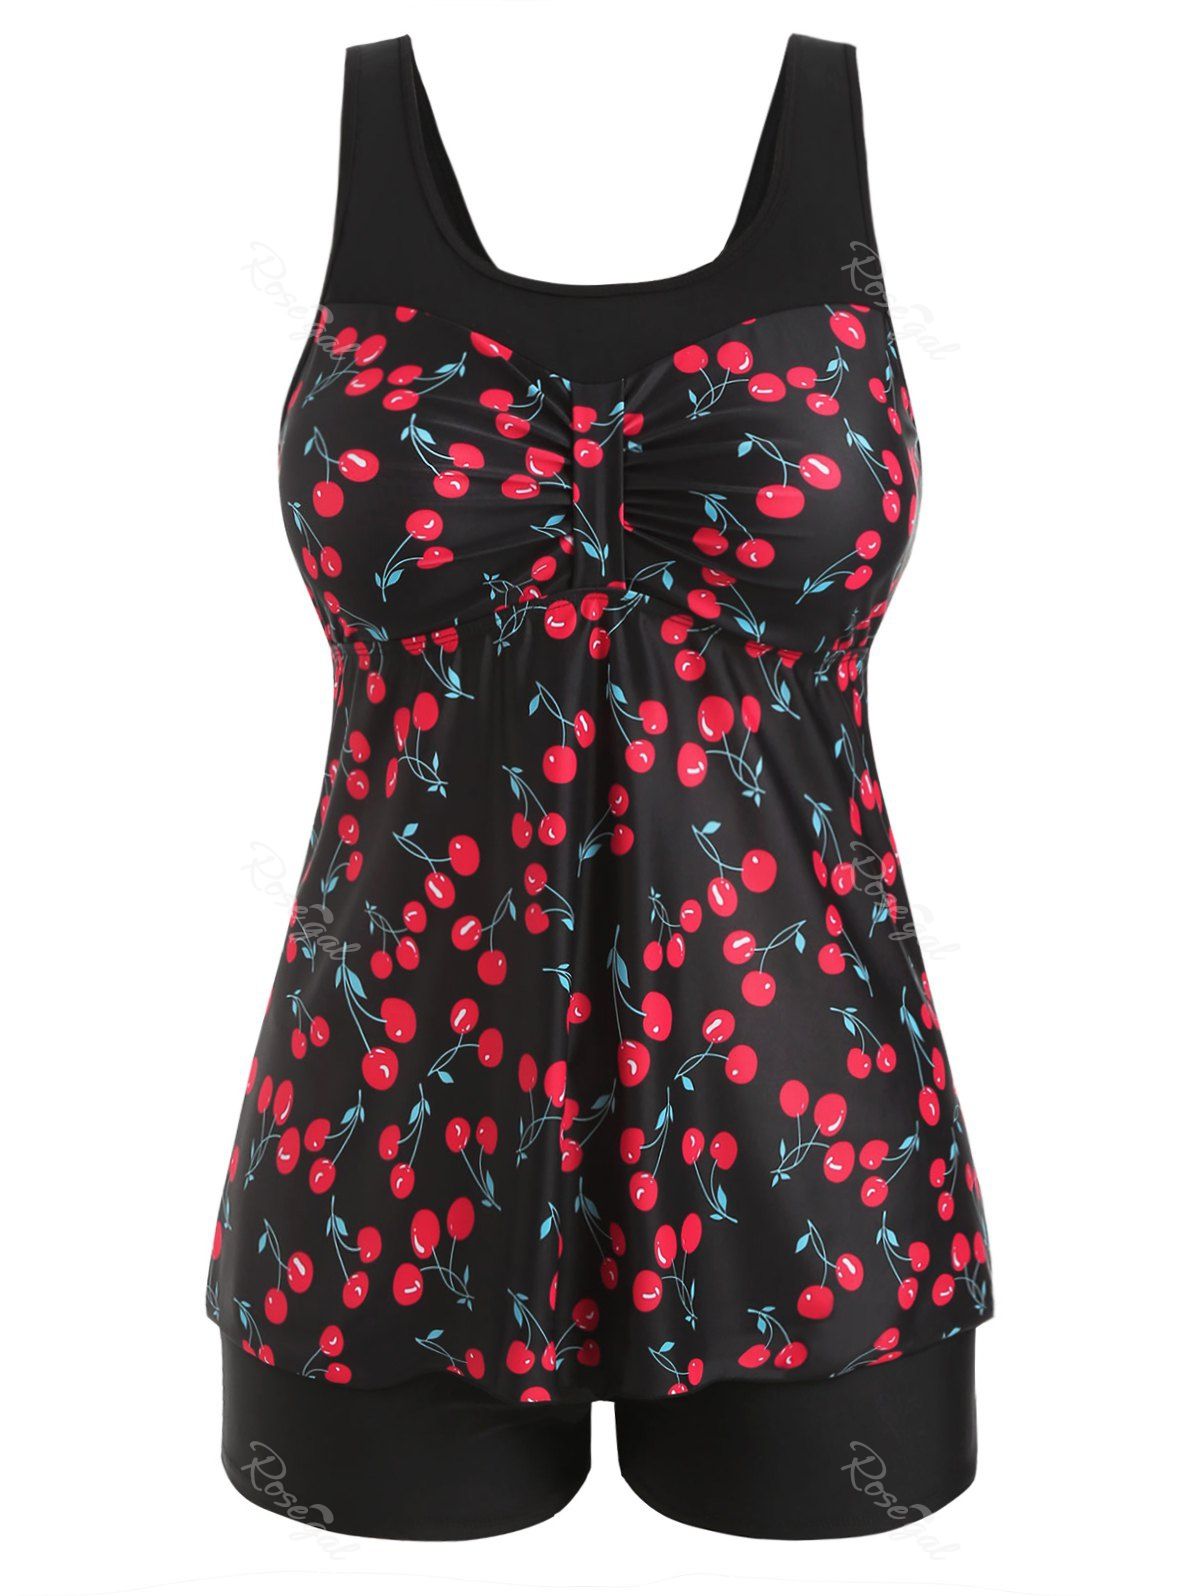 [38% OFF] Contrast Ruched Cherry Print Plus Size Tankini Swimsuit | Rosegal